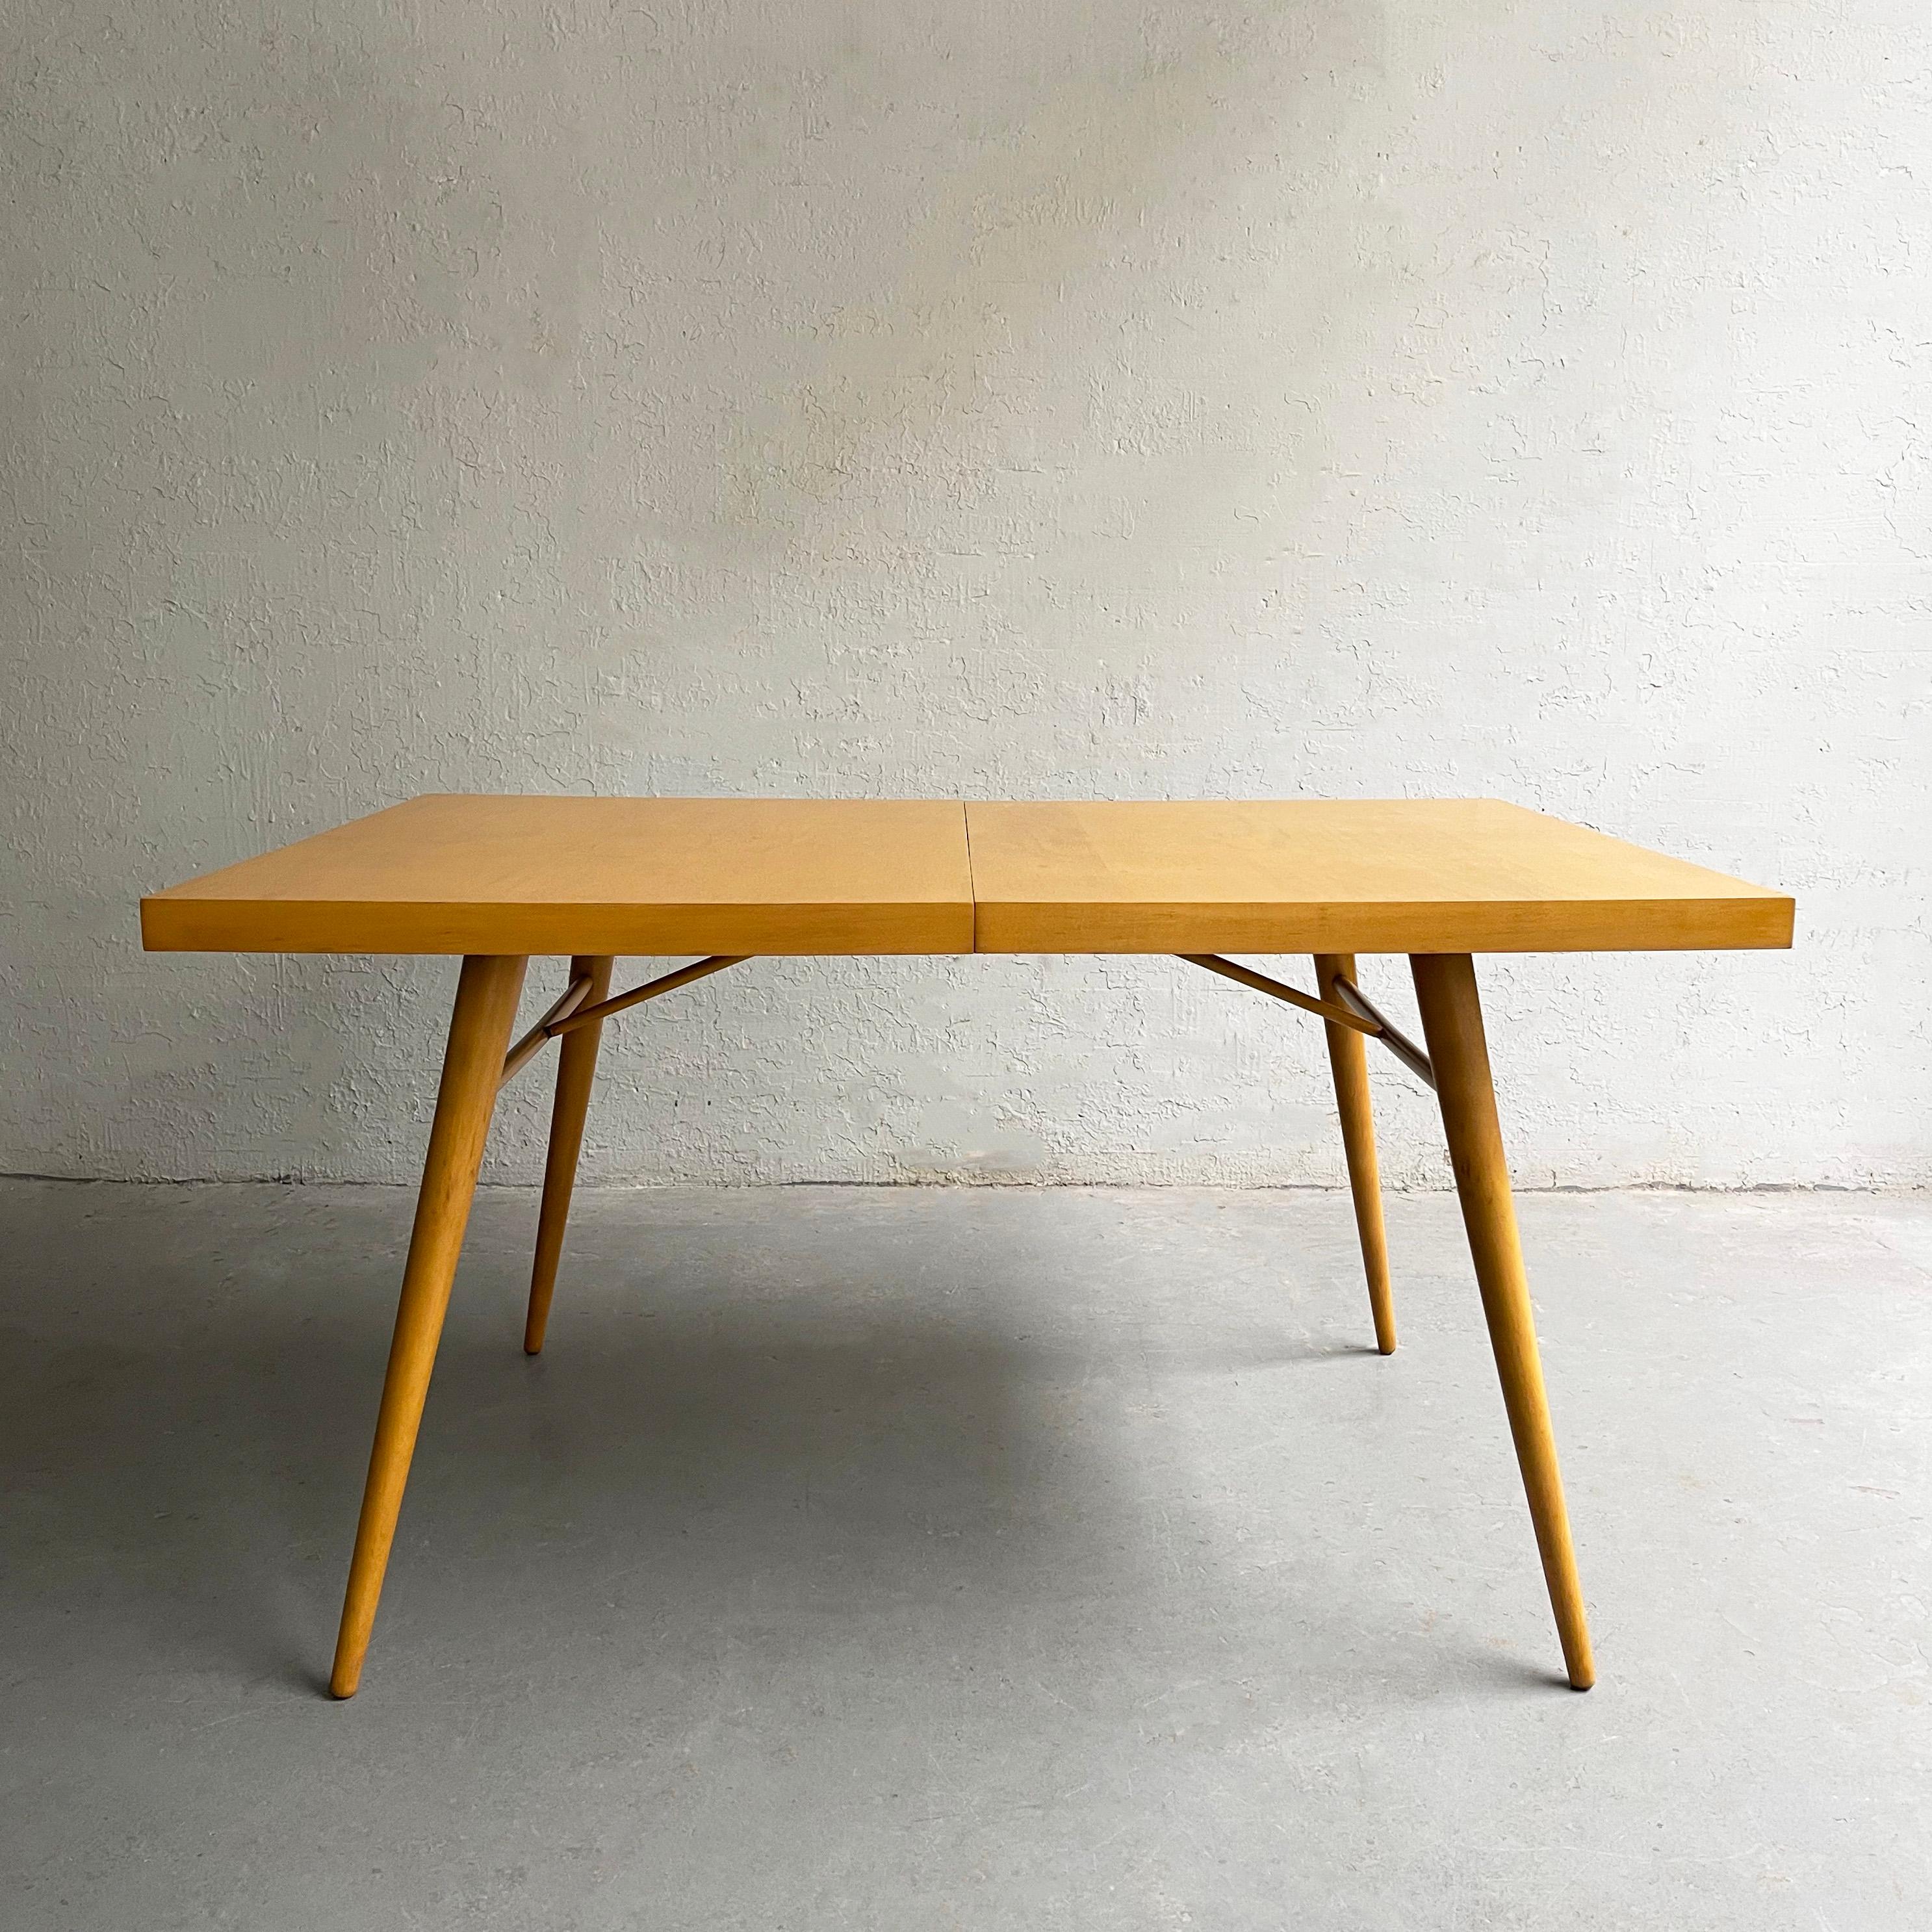 Model 1522, maple dining table by Paul McCobb for Planner Group, Winchendon, is iconic midcentury design that never goes out of style. The table can accept leaves but no leaves are present.